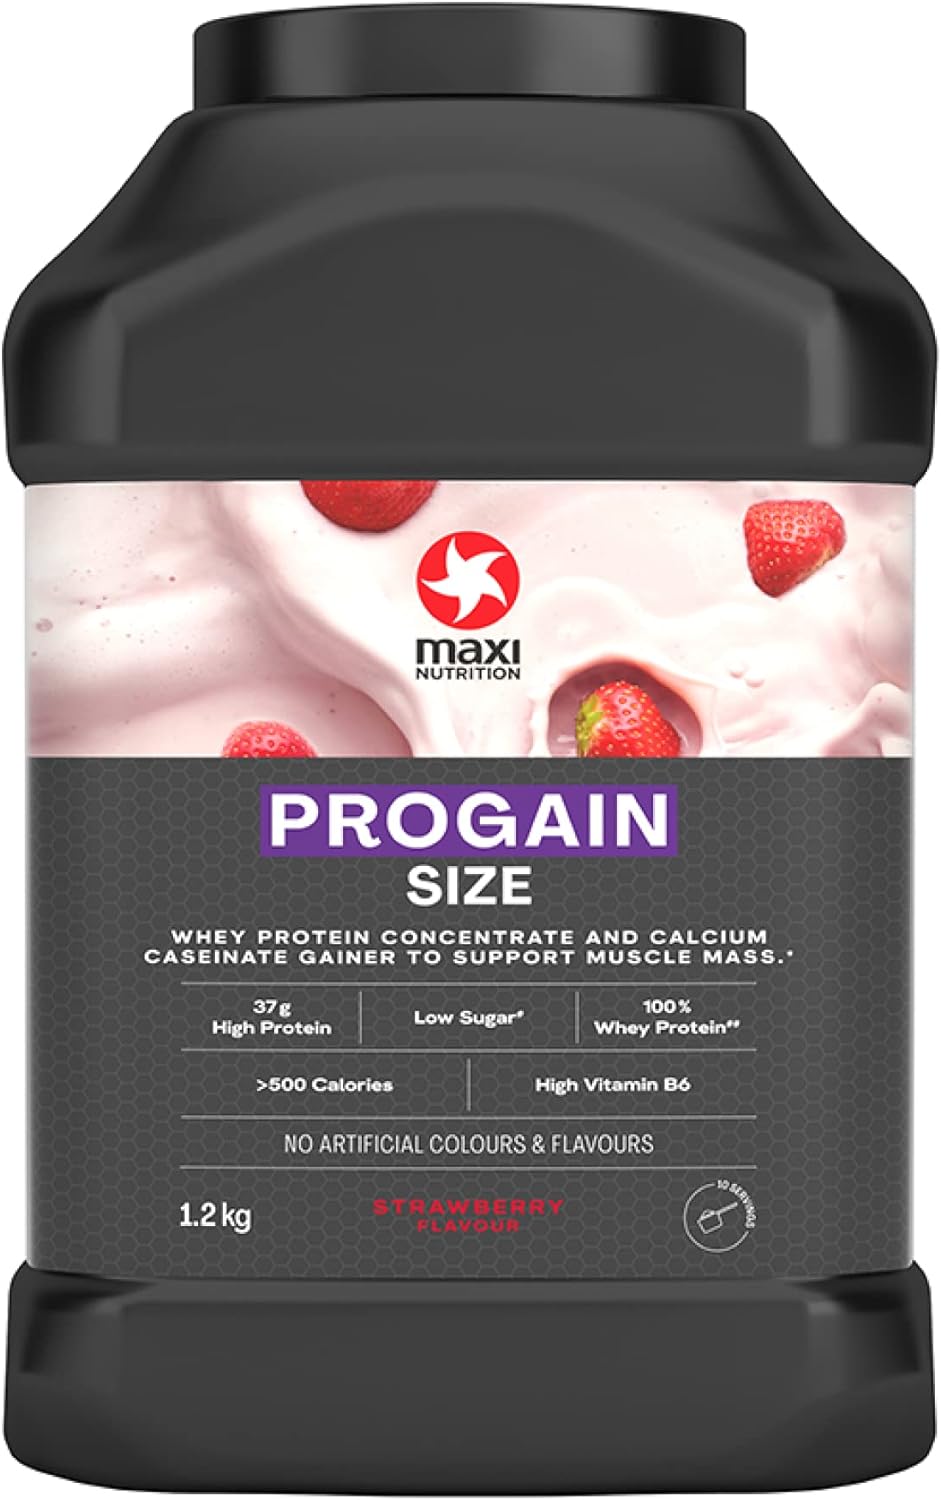 MaxiNutrition - Progain, Strawberry - Whey Protein Powder for Size & Muscle Mass ? Low Sugar, Vegetarian-Friendly, 37g Protein, 511 kcal per Serving, 1.2kg